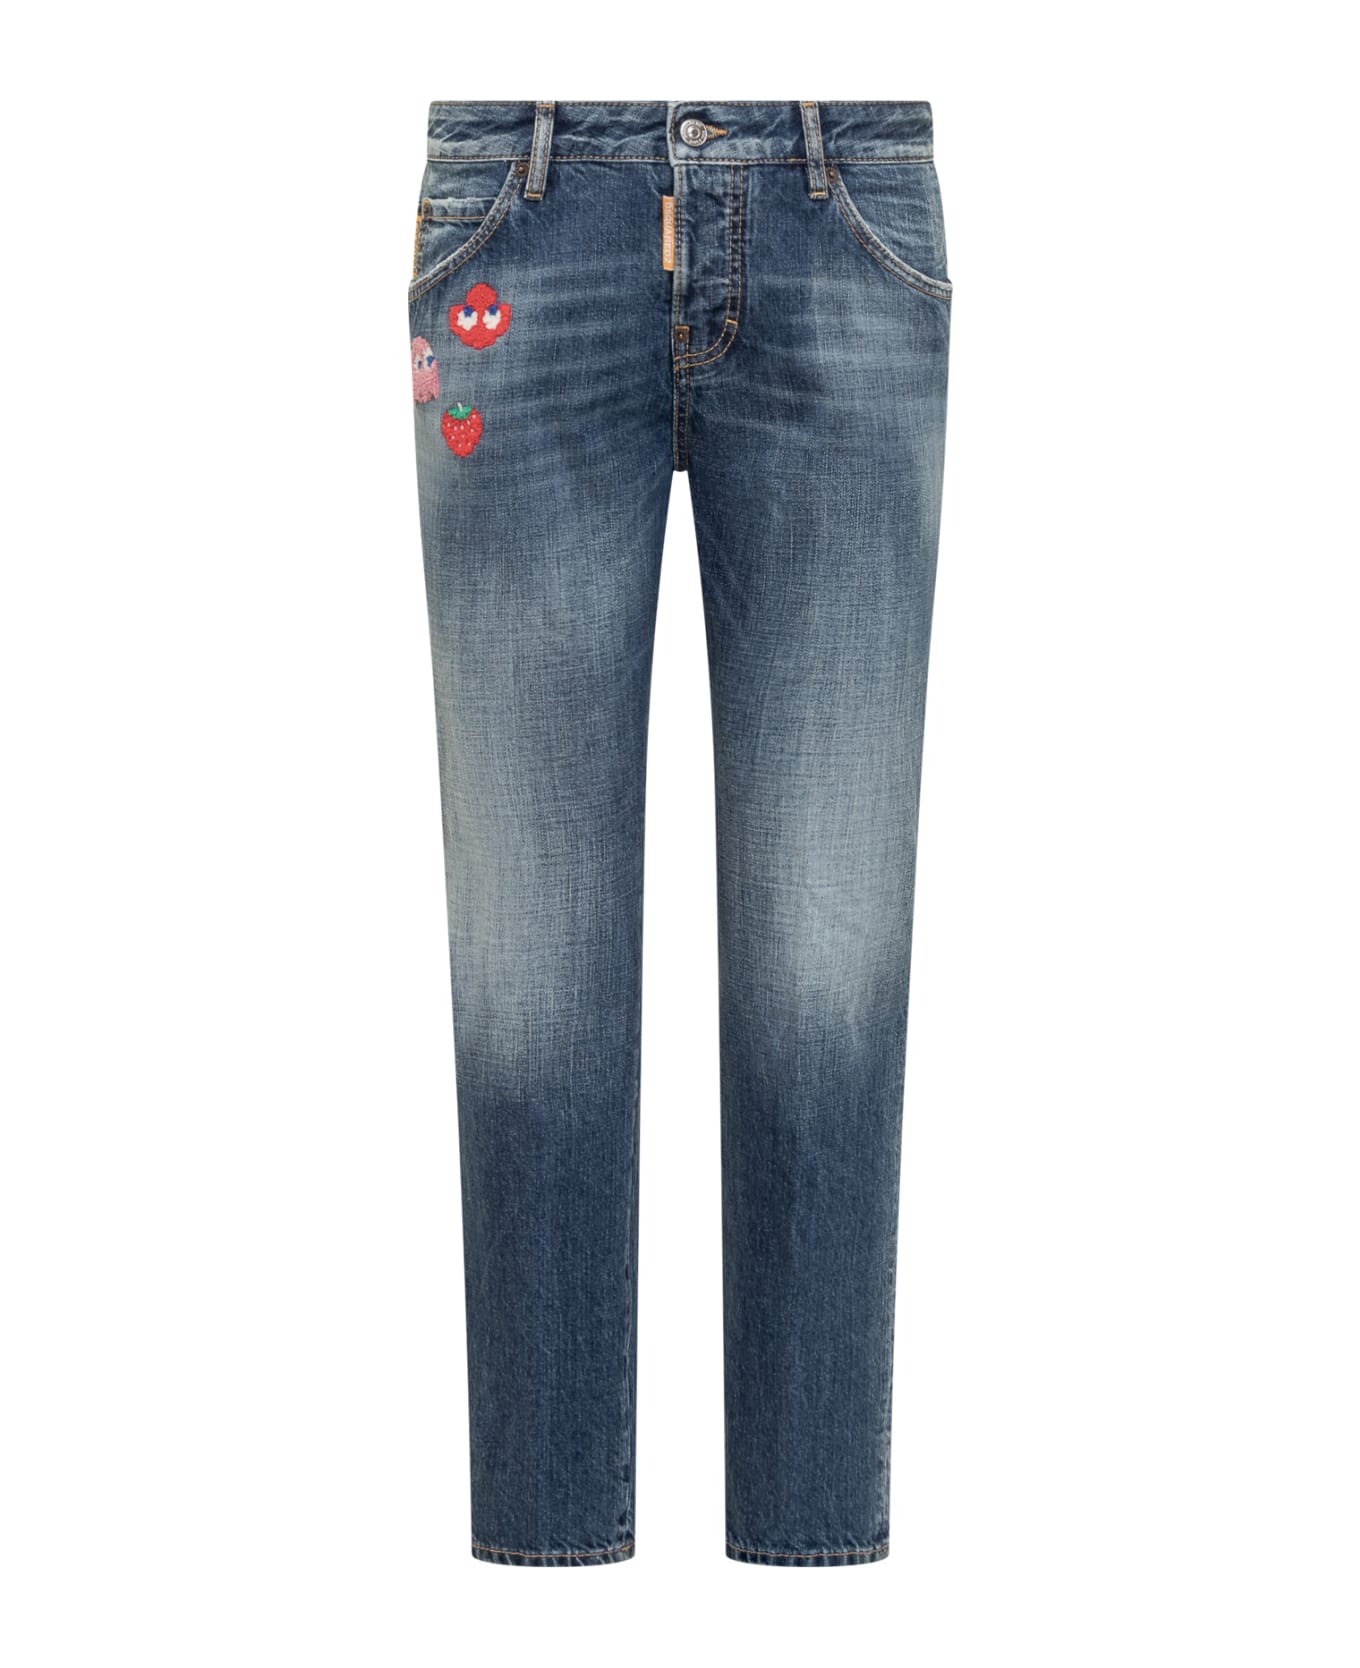 Dsquared2 Pac-man X Dsquared2 Jeans - NAVY BLUE